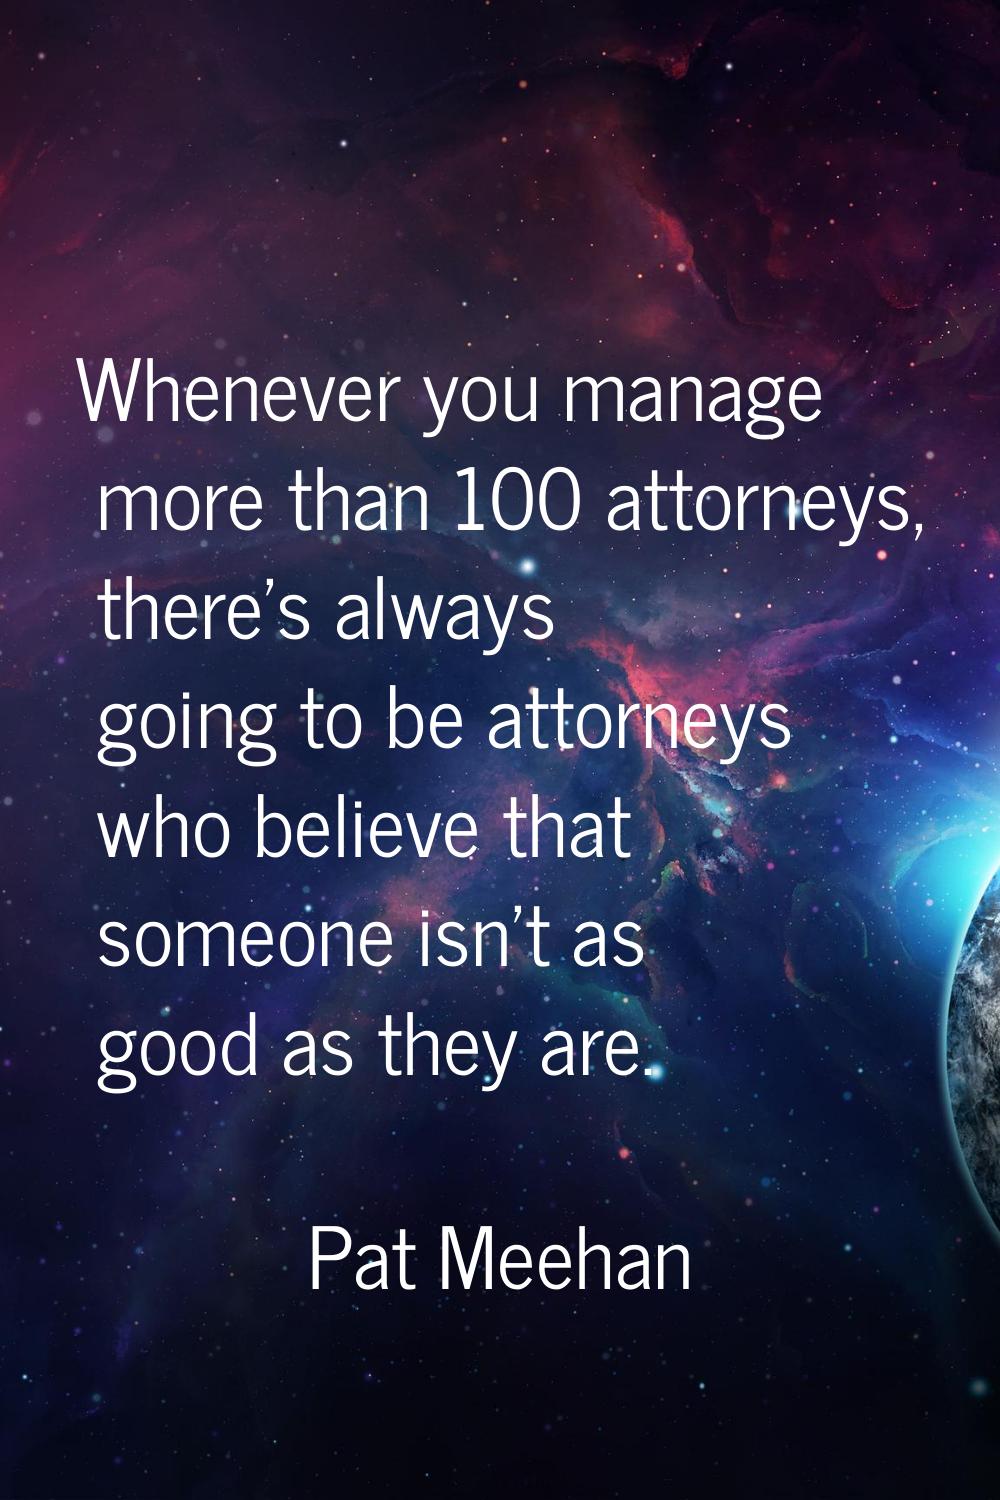 Whenever you manage more than 100 attorneys, there's always going to be attorneys who believe that 